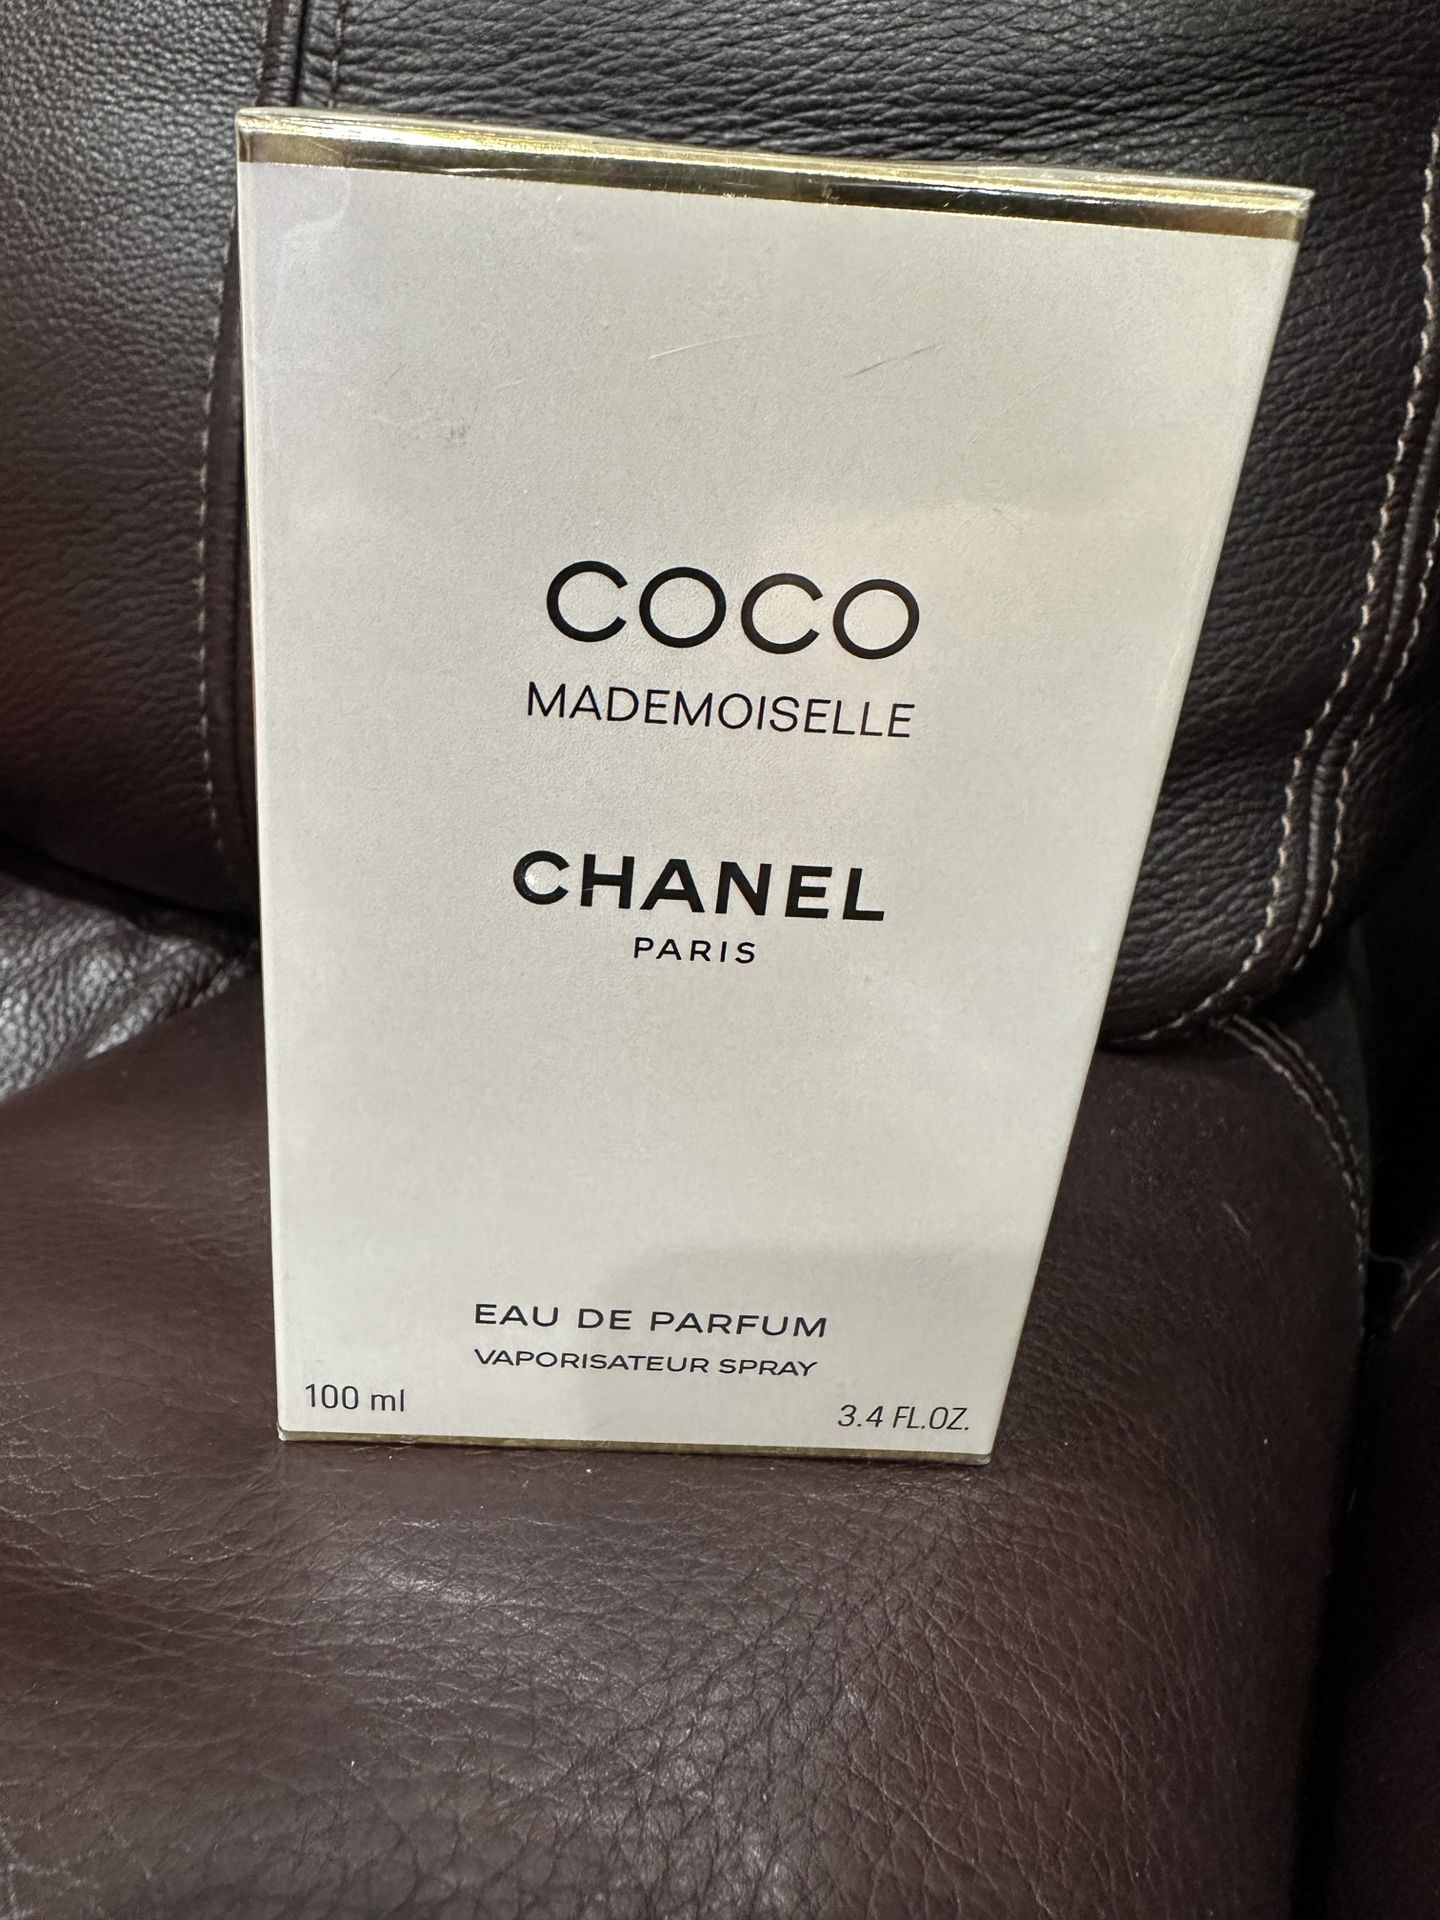 Chanel coco mademoiselle perfume for Sale in Anaheim, CA - OfferUp